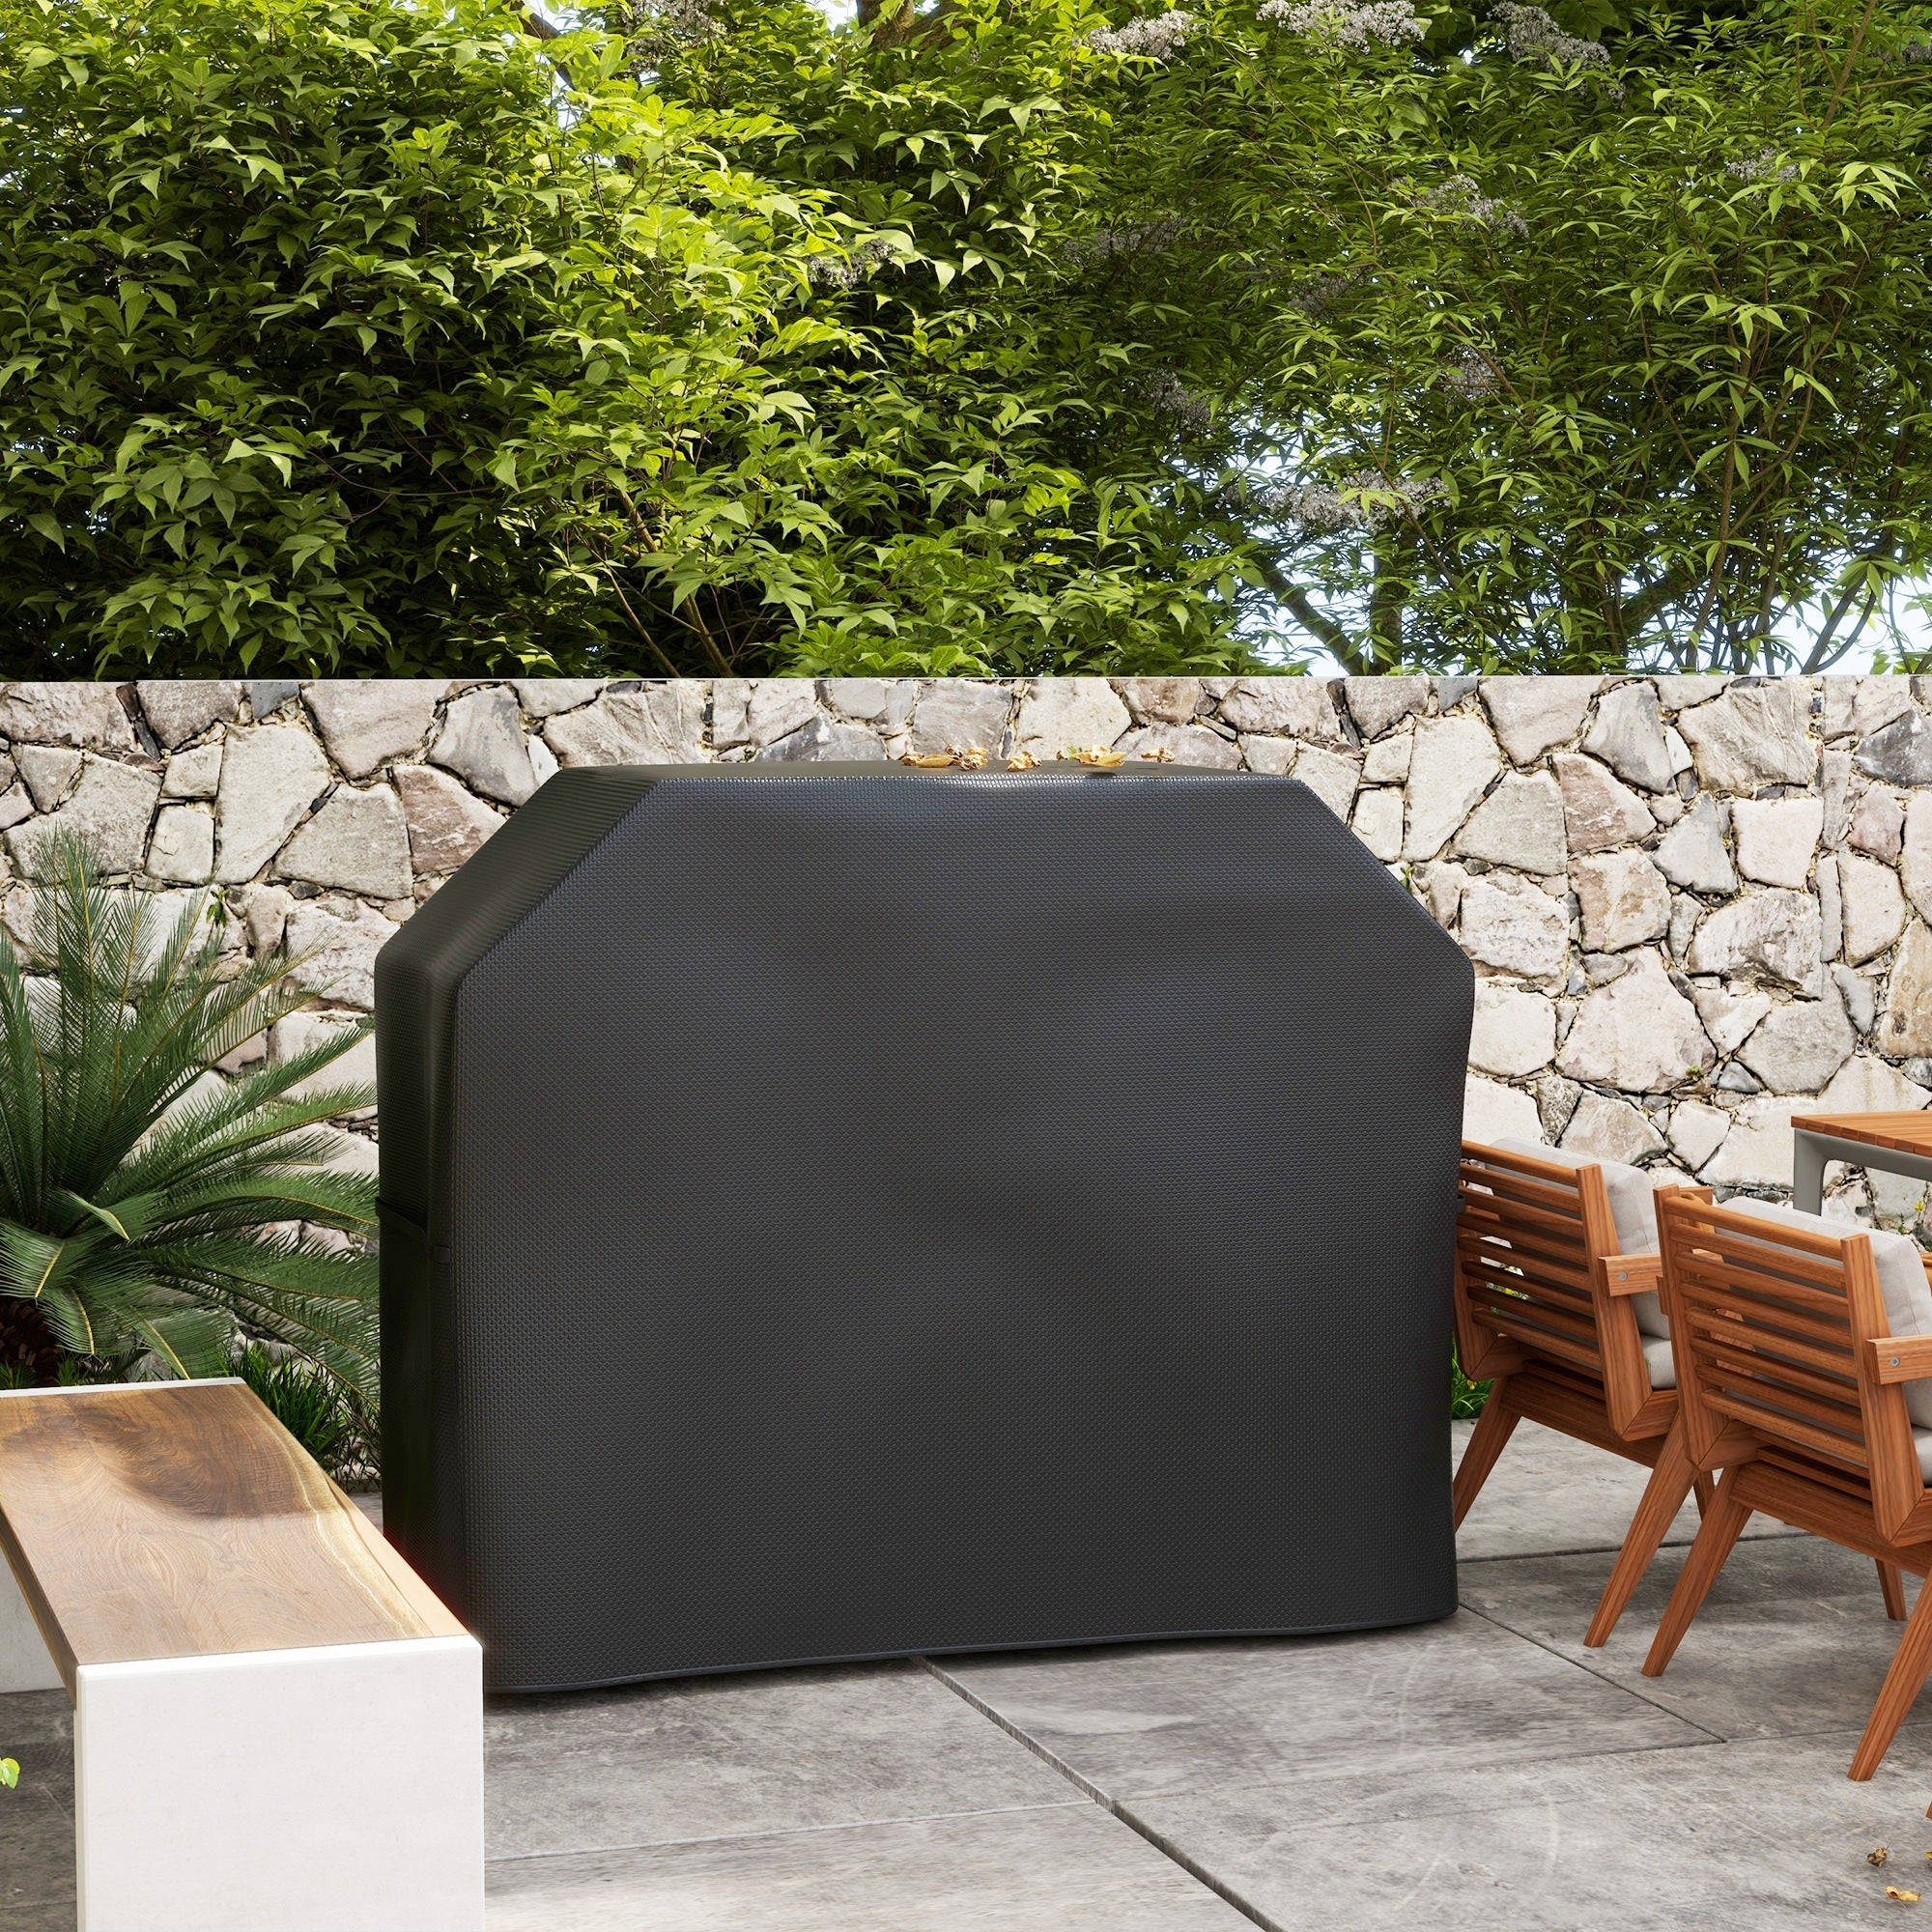 147 x 61cm Plastic Coated Protective Grill Cover - Black-1